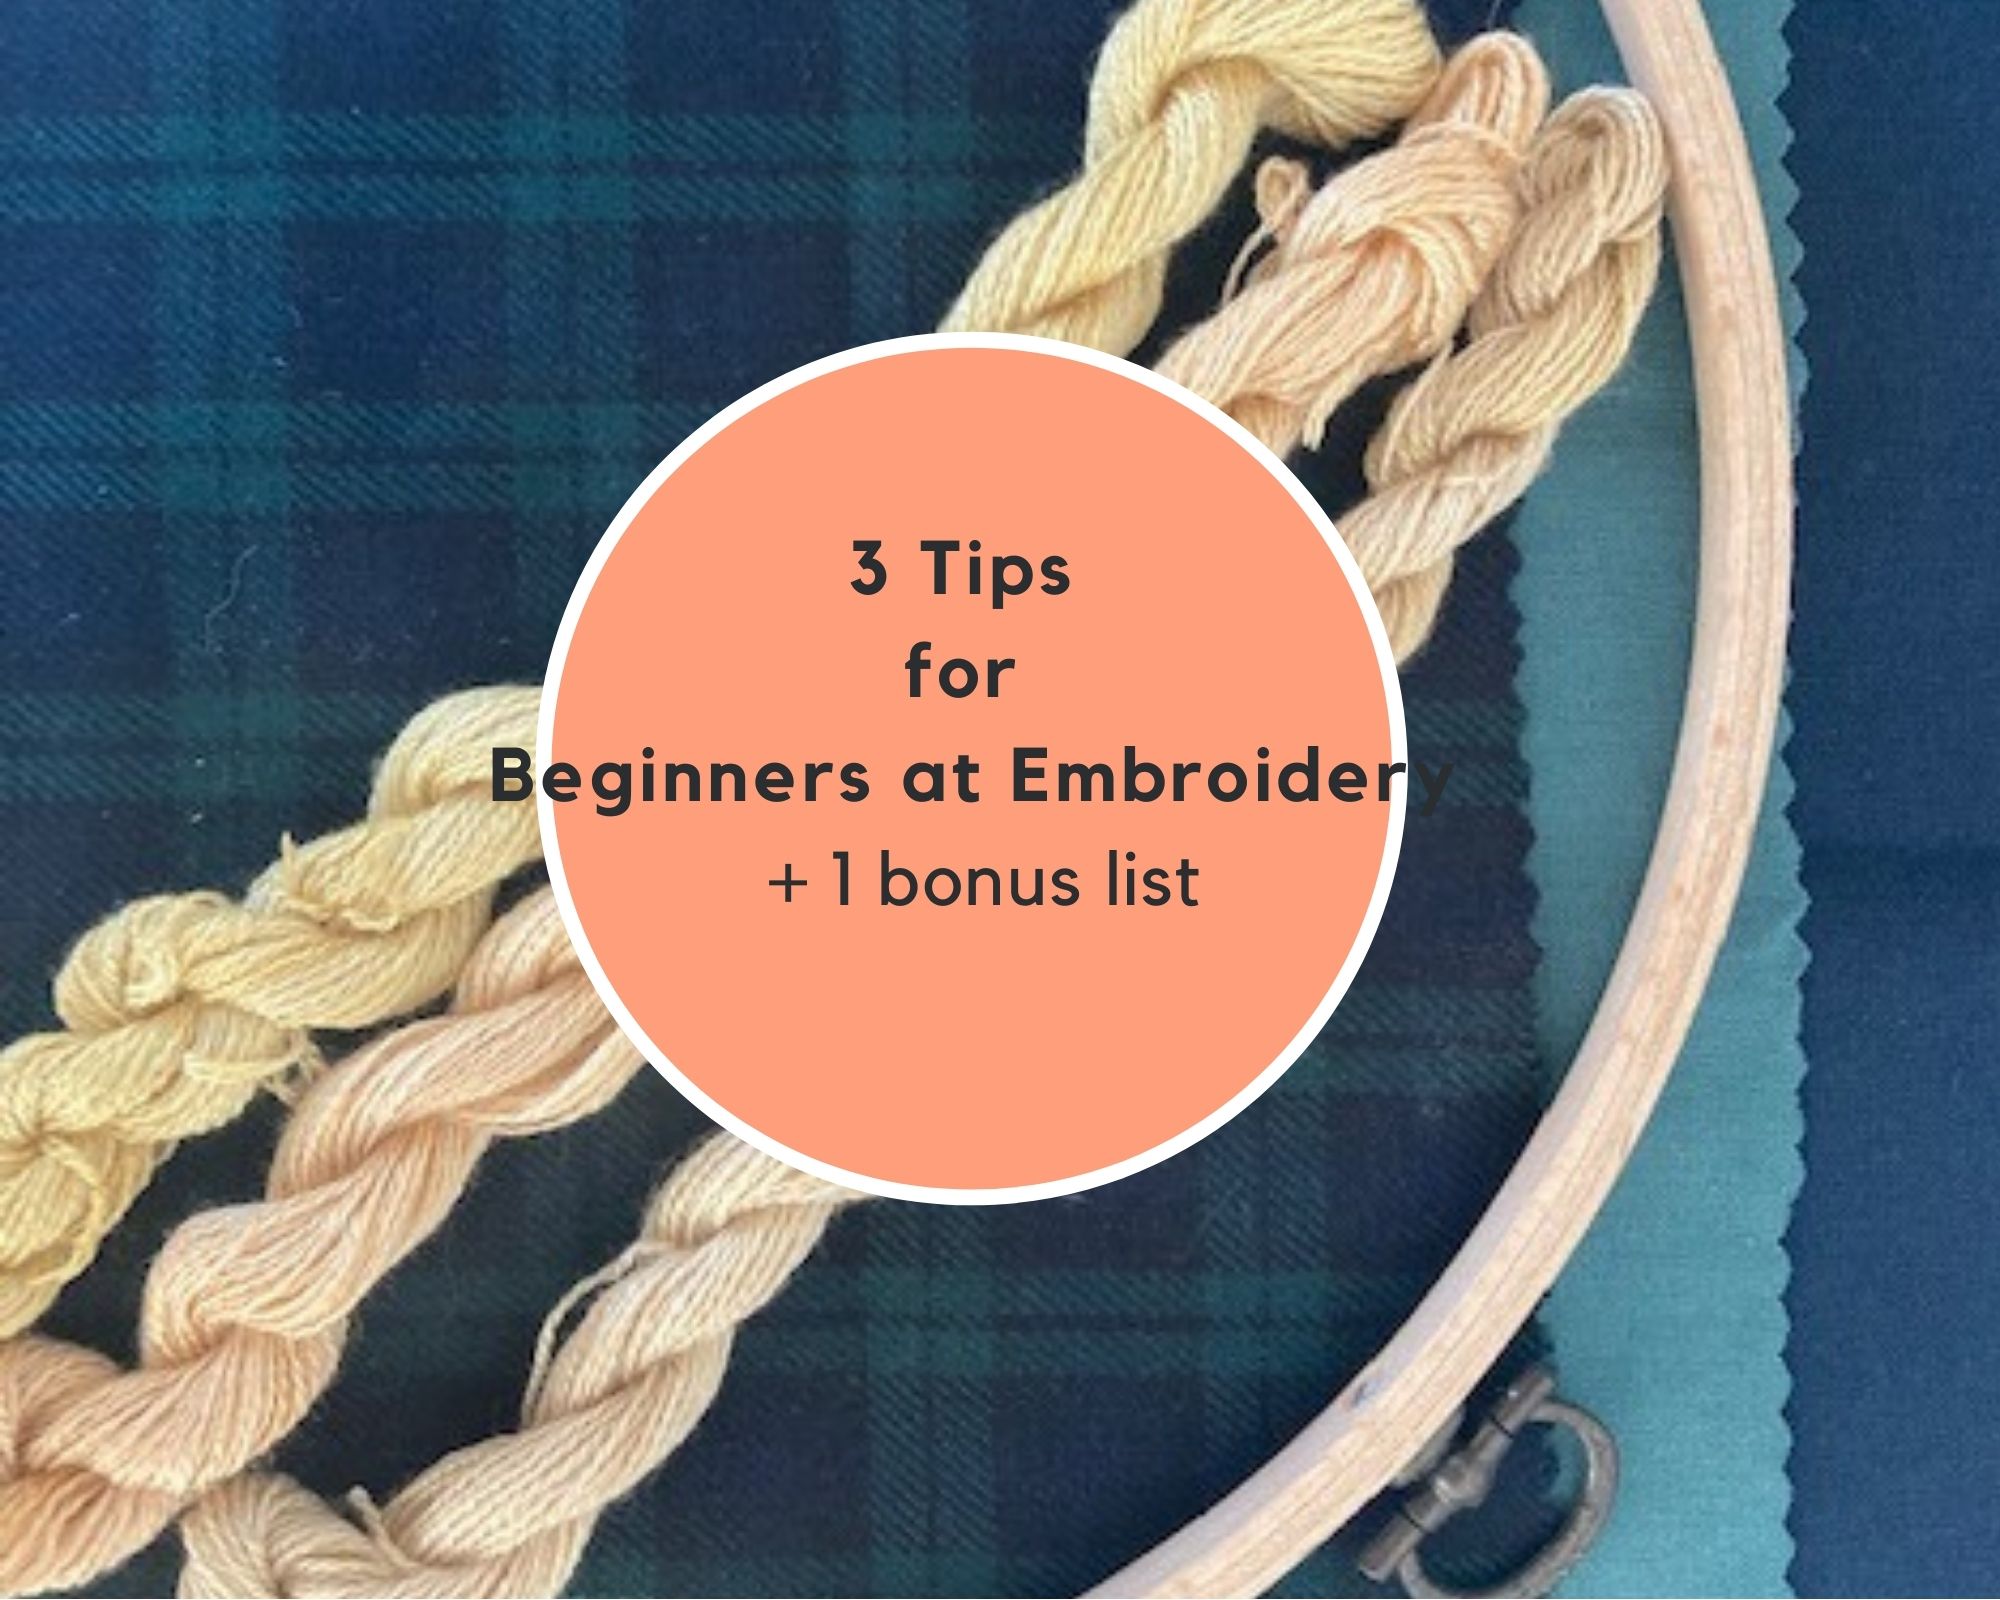 3 Tips for beginners at embroidery + Bonus: 1 curated list of embroidery kits